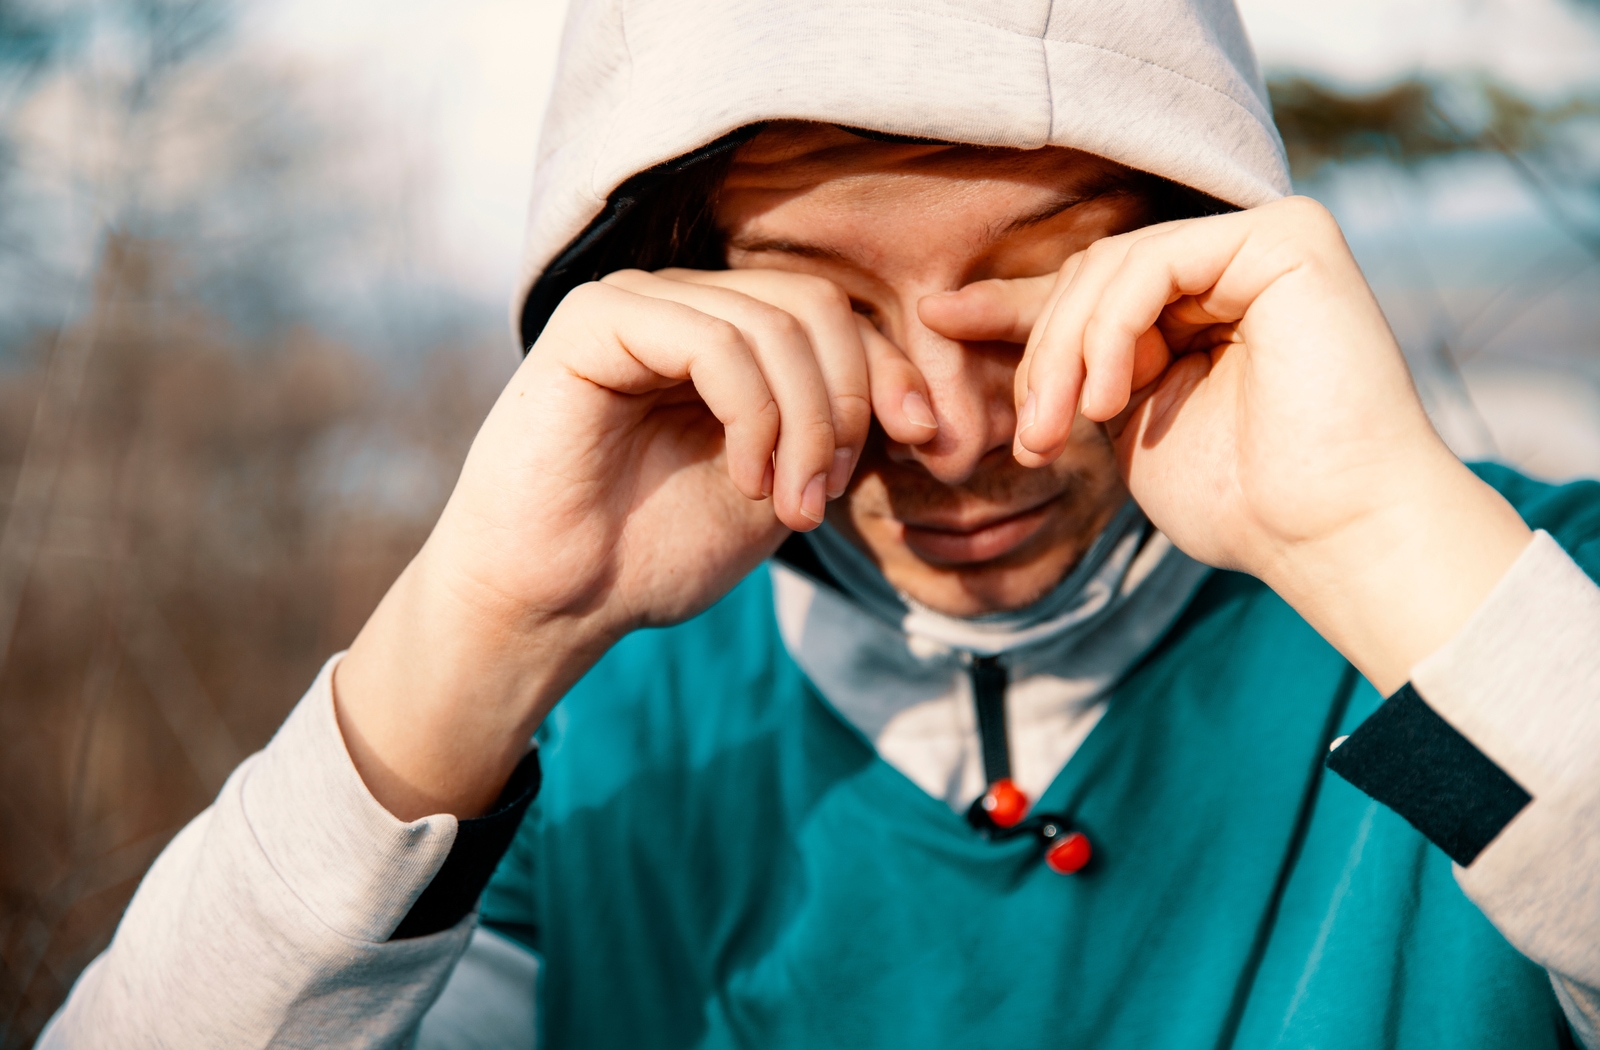 A man outside wearing a hoodie with the hood up, rubbing his eye's because his eyes are sensitive to light